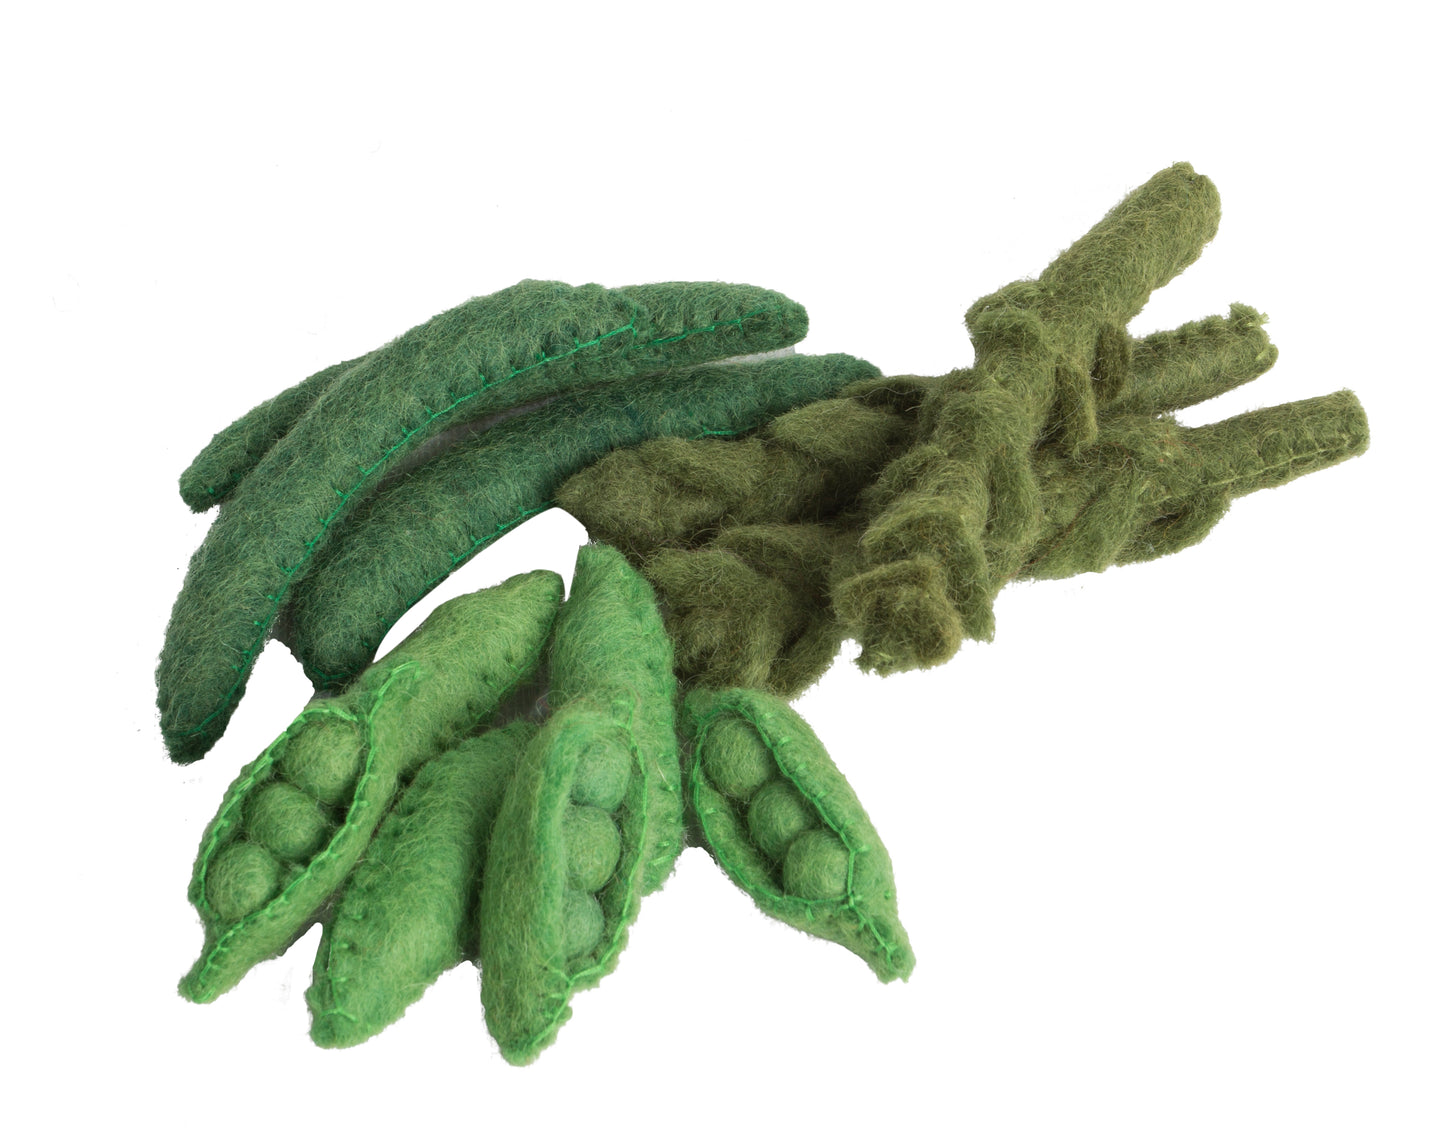 Papoose Toys Felt Vegetables FINAL CLEARANCE